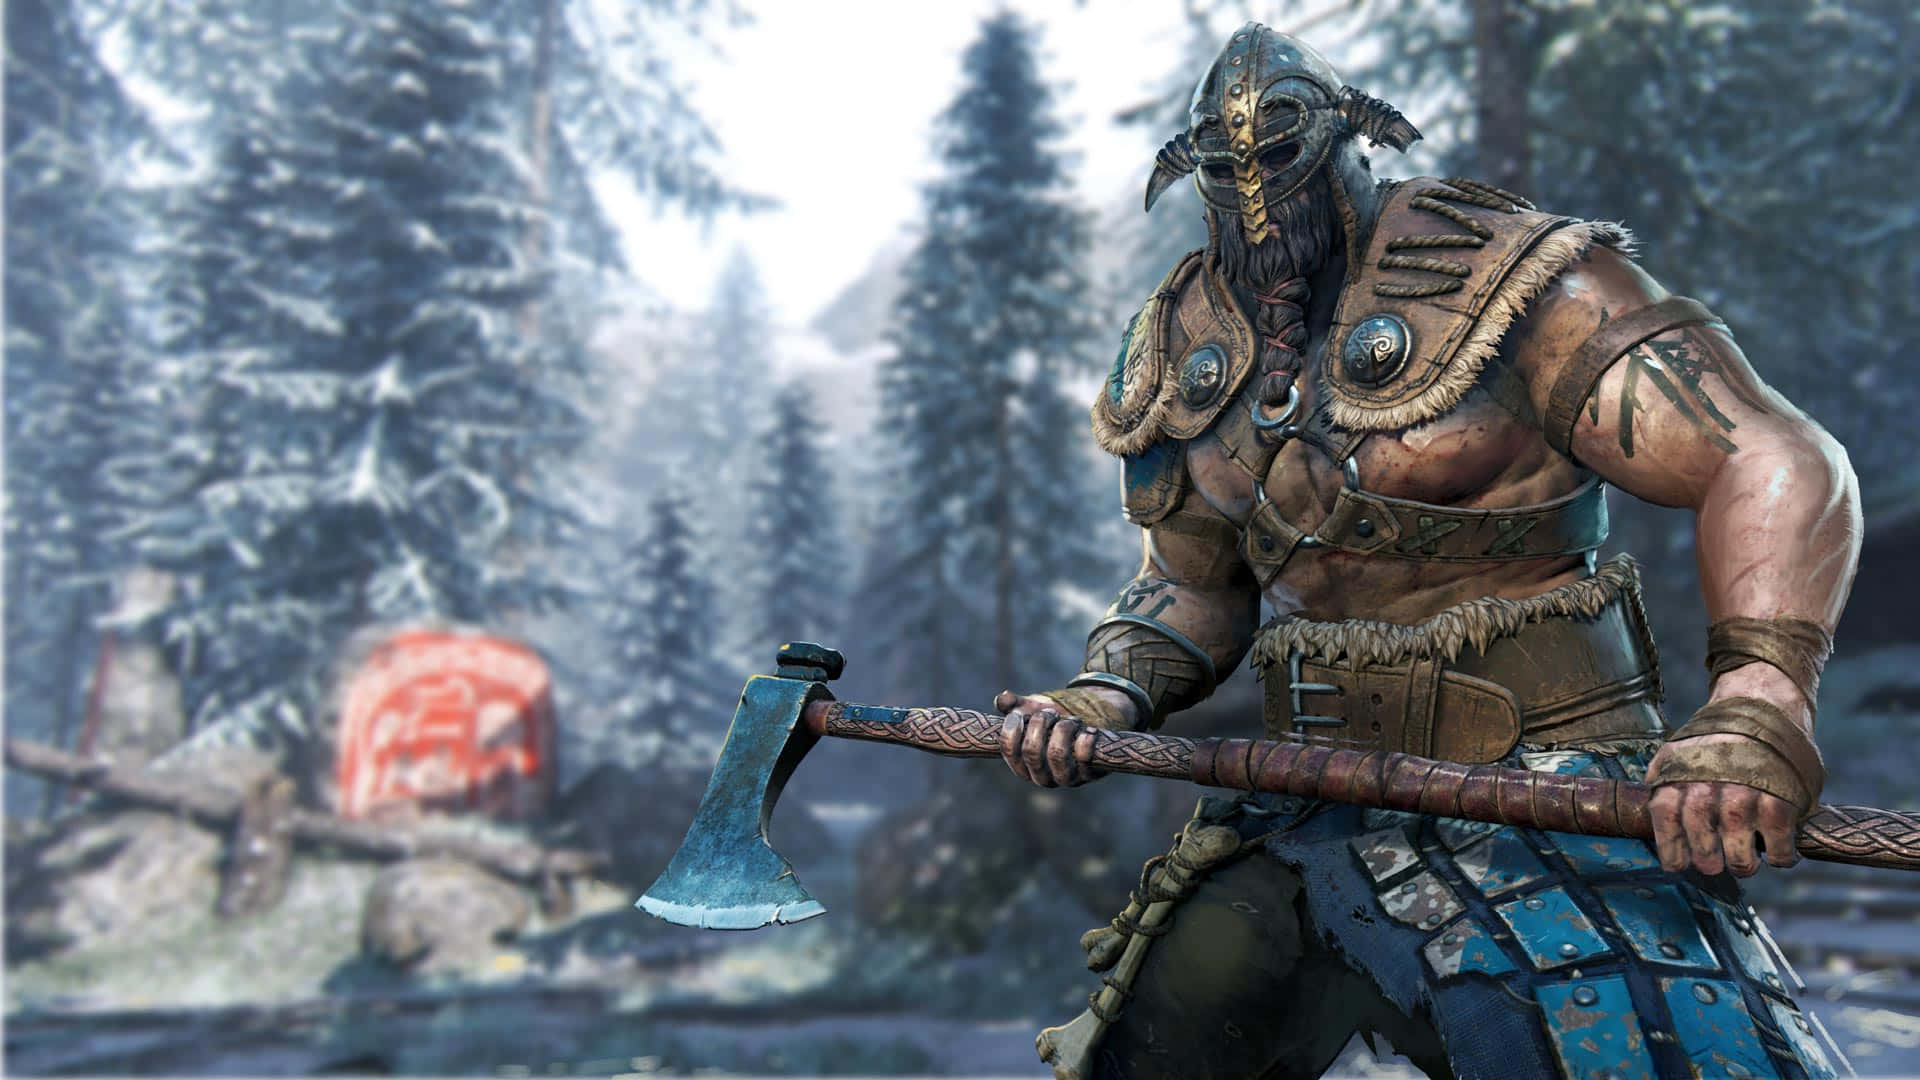 1080p For Honor Background Outlander With An Axe